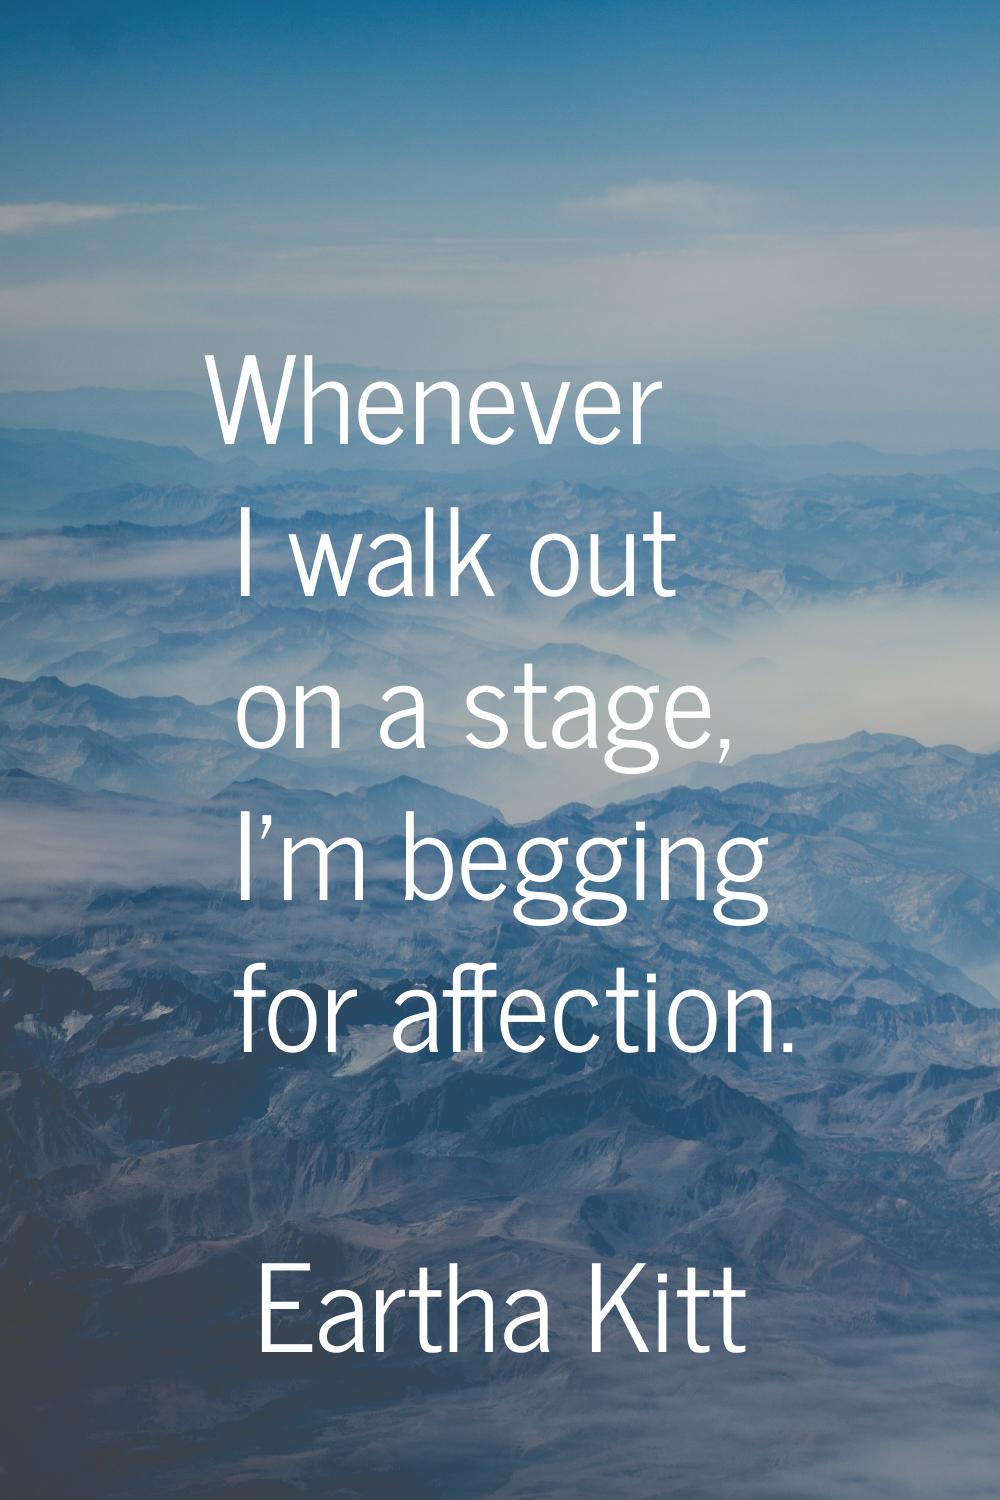 Whenever I walk out on a stage, I'm begging for affection.